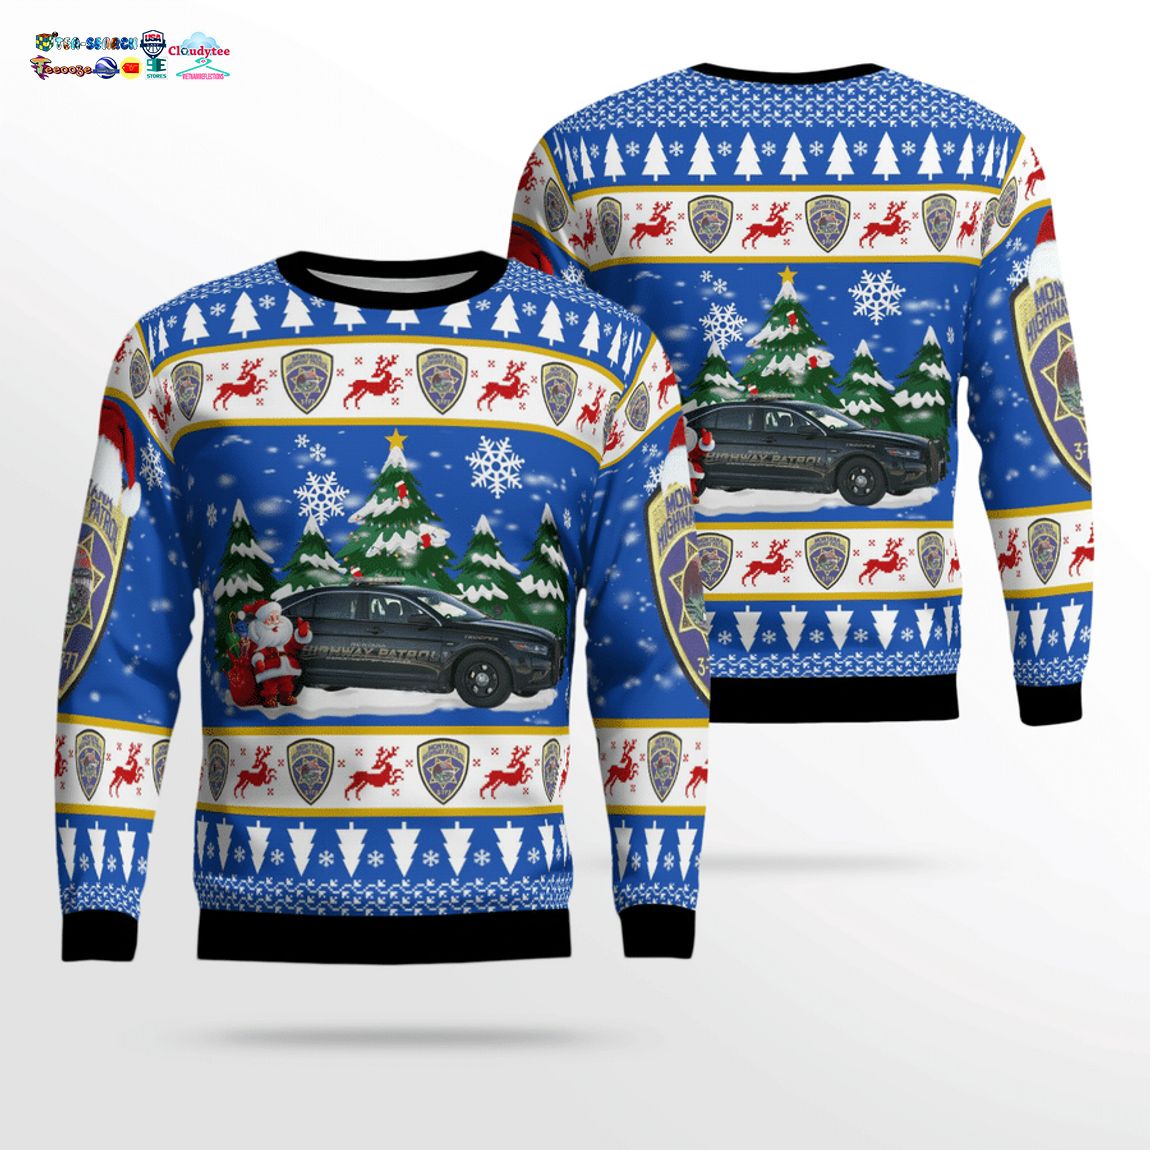 Montana Highway Patrol Ford Taurus 2016 3D Christmas Sweater - Rocking picture